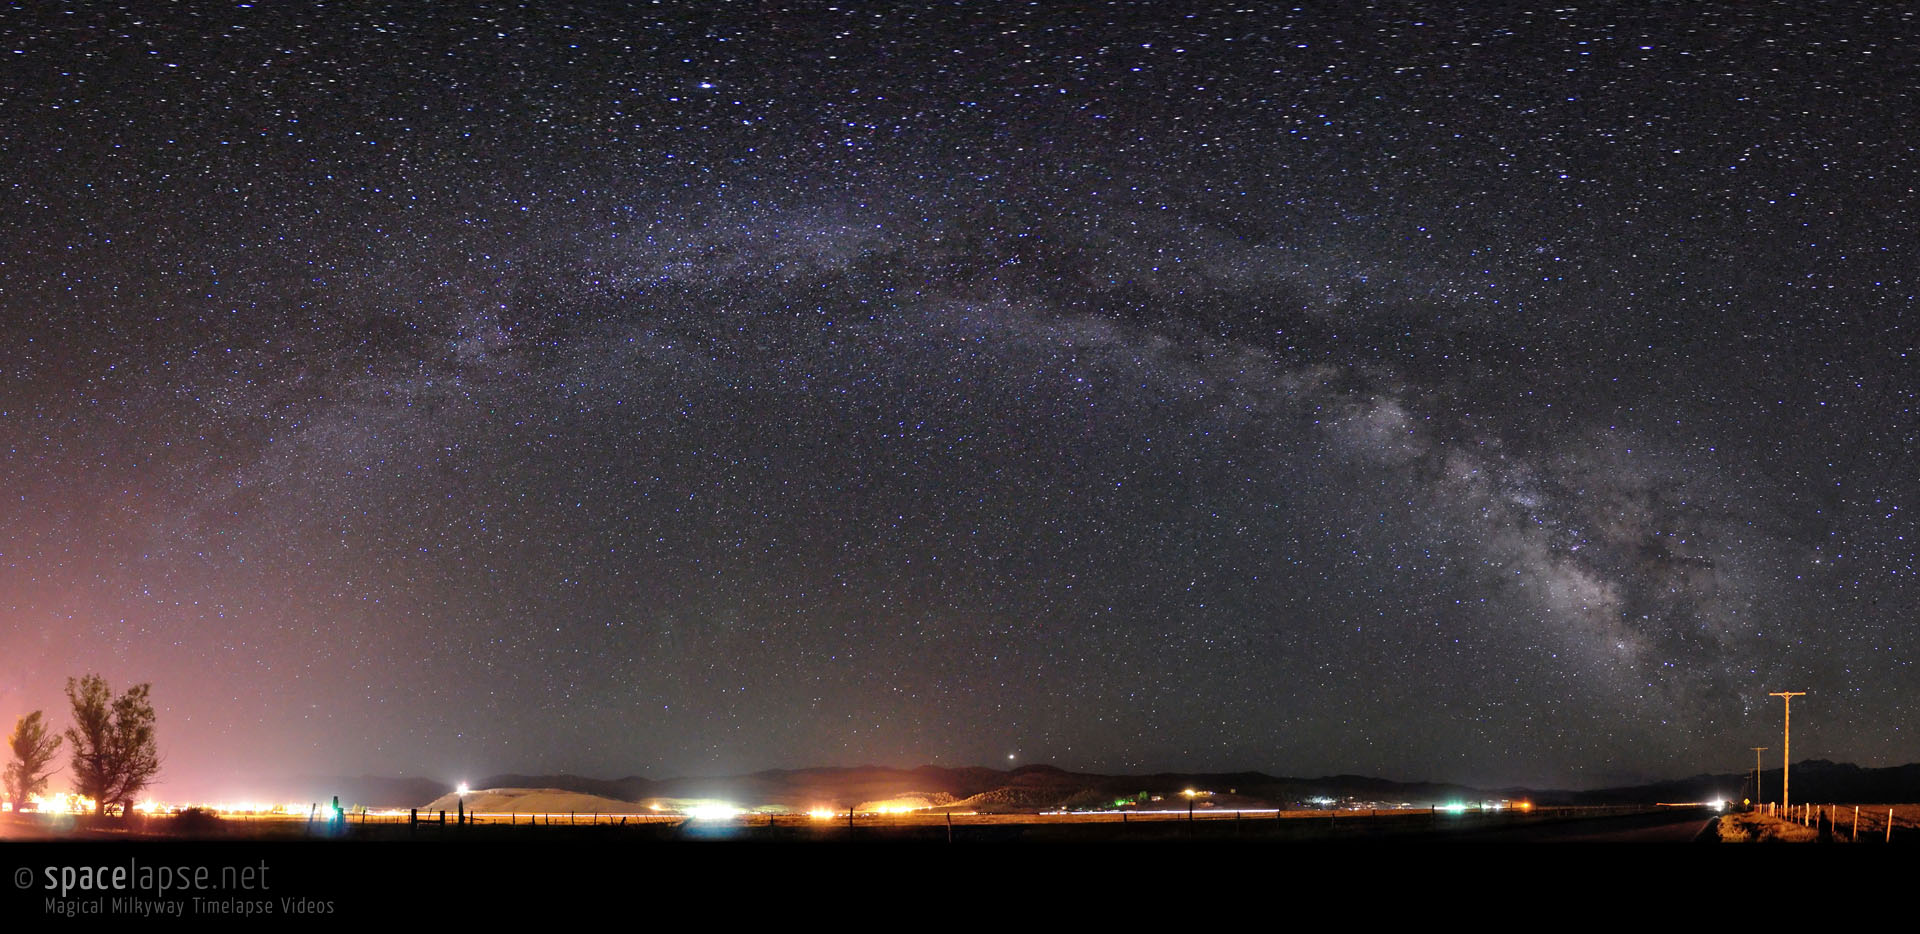 Protecting Earth - The milkyway is protecting the earth, near Bodie, USA